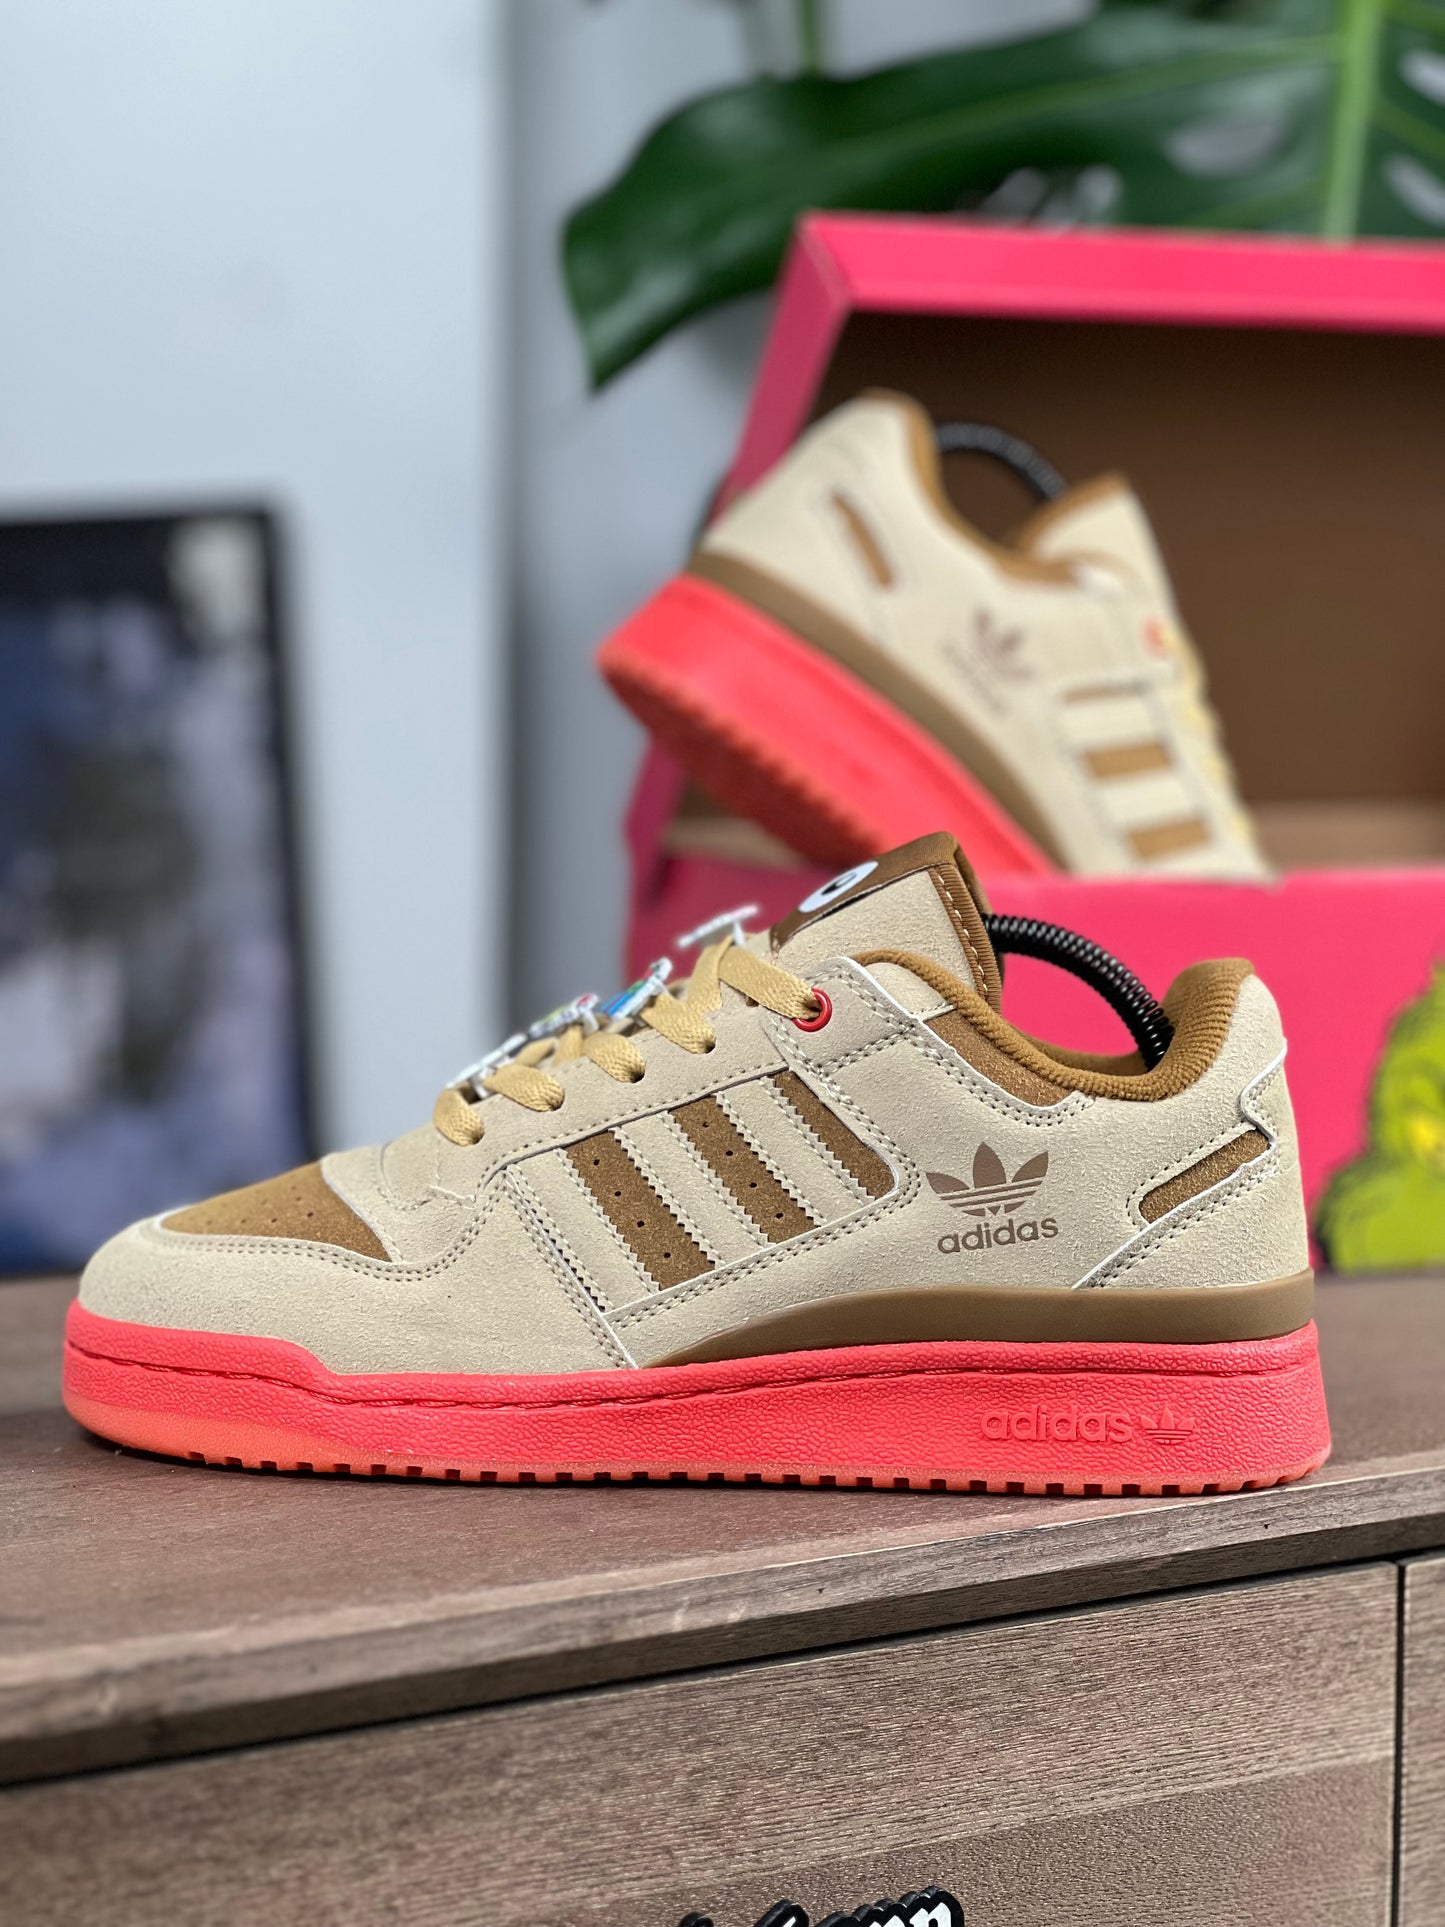 The Grinch x adidas Forum Low "THE GRINCH"